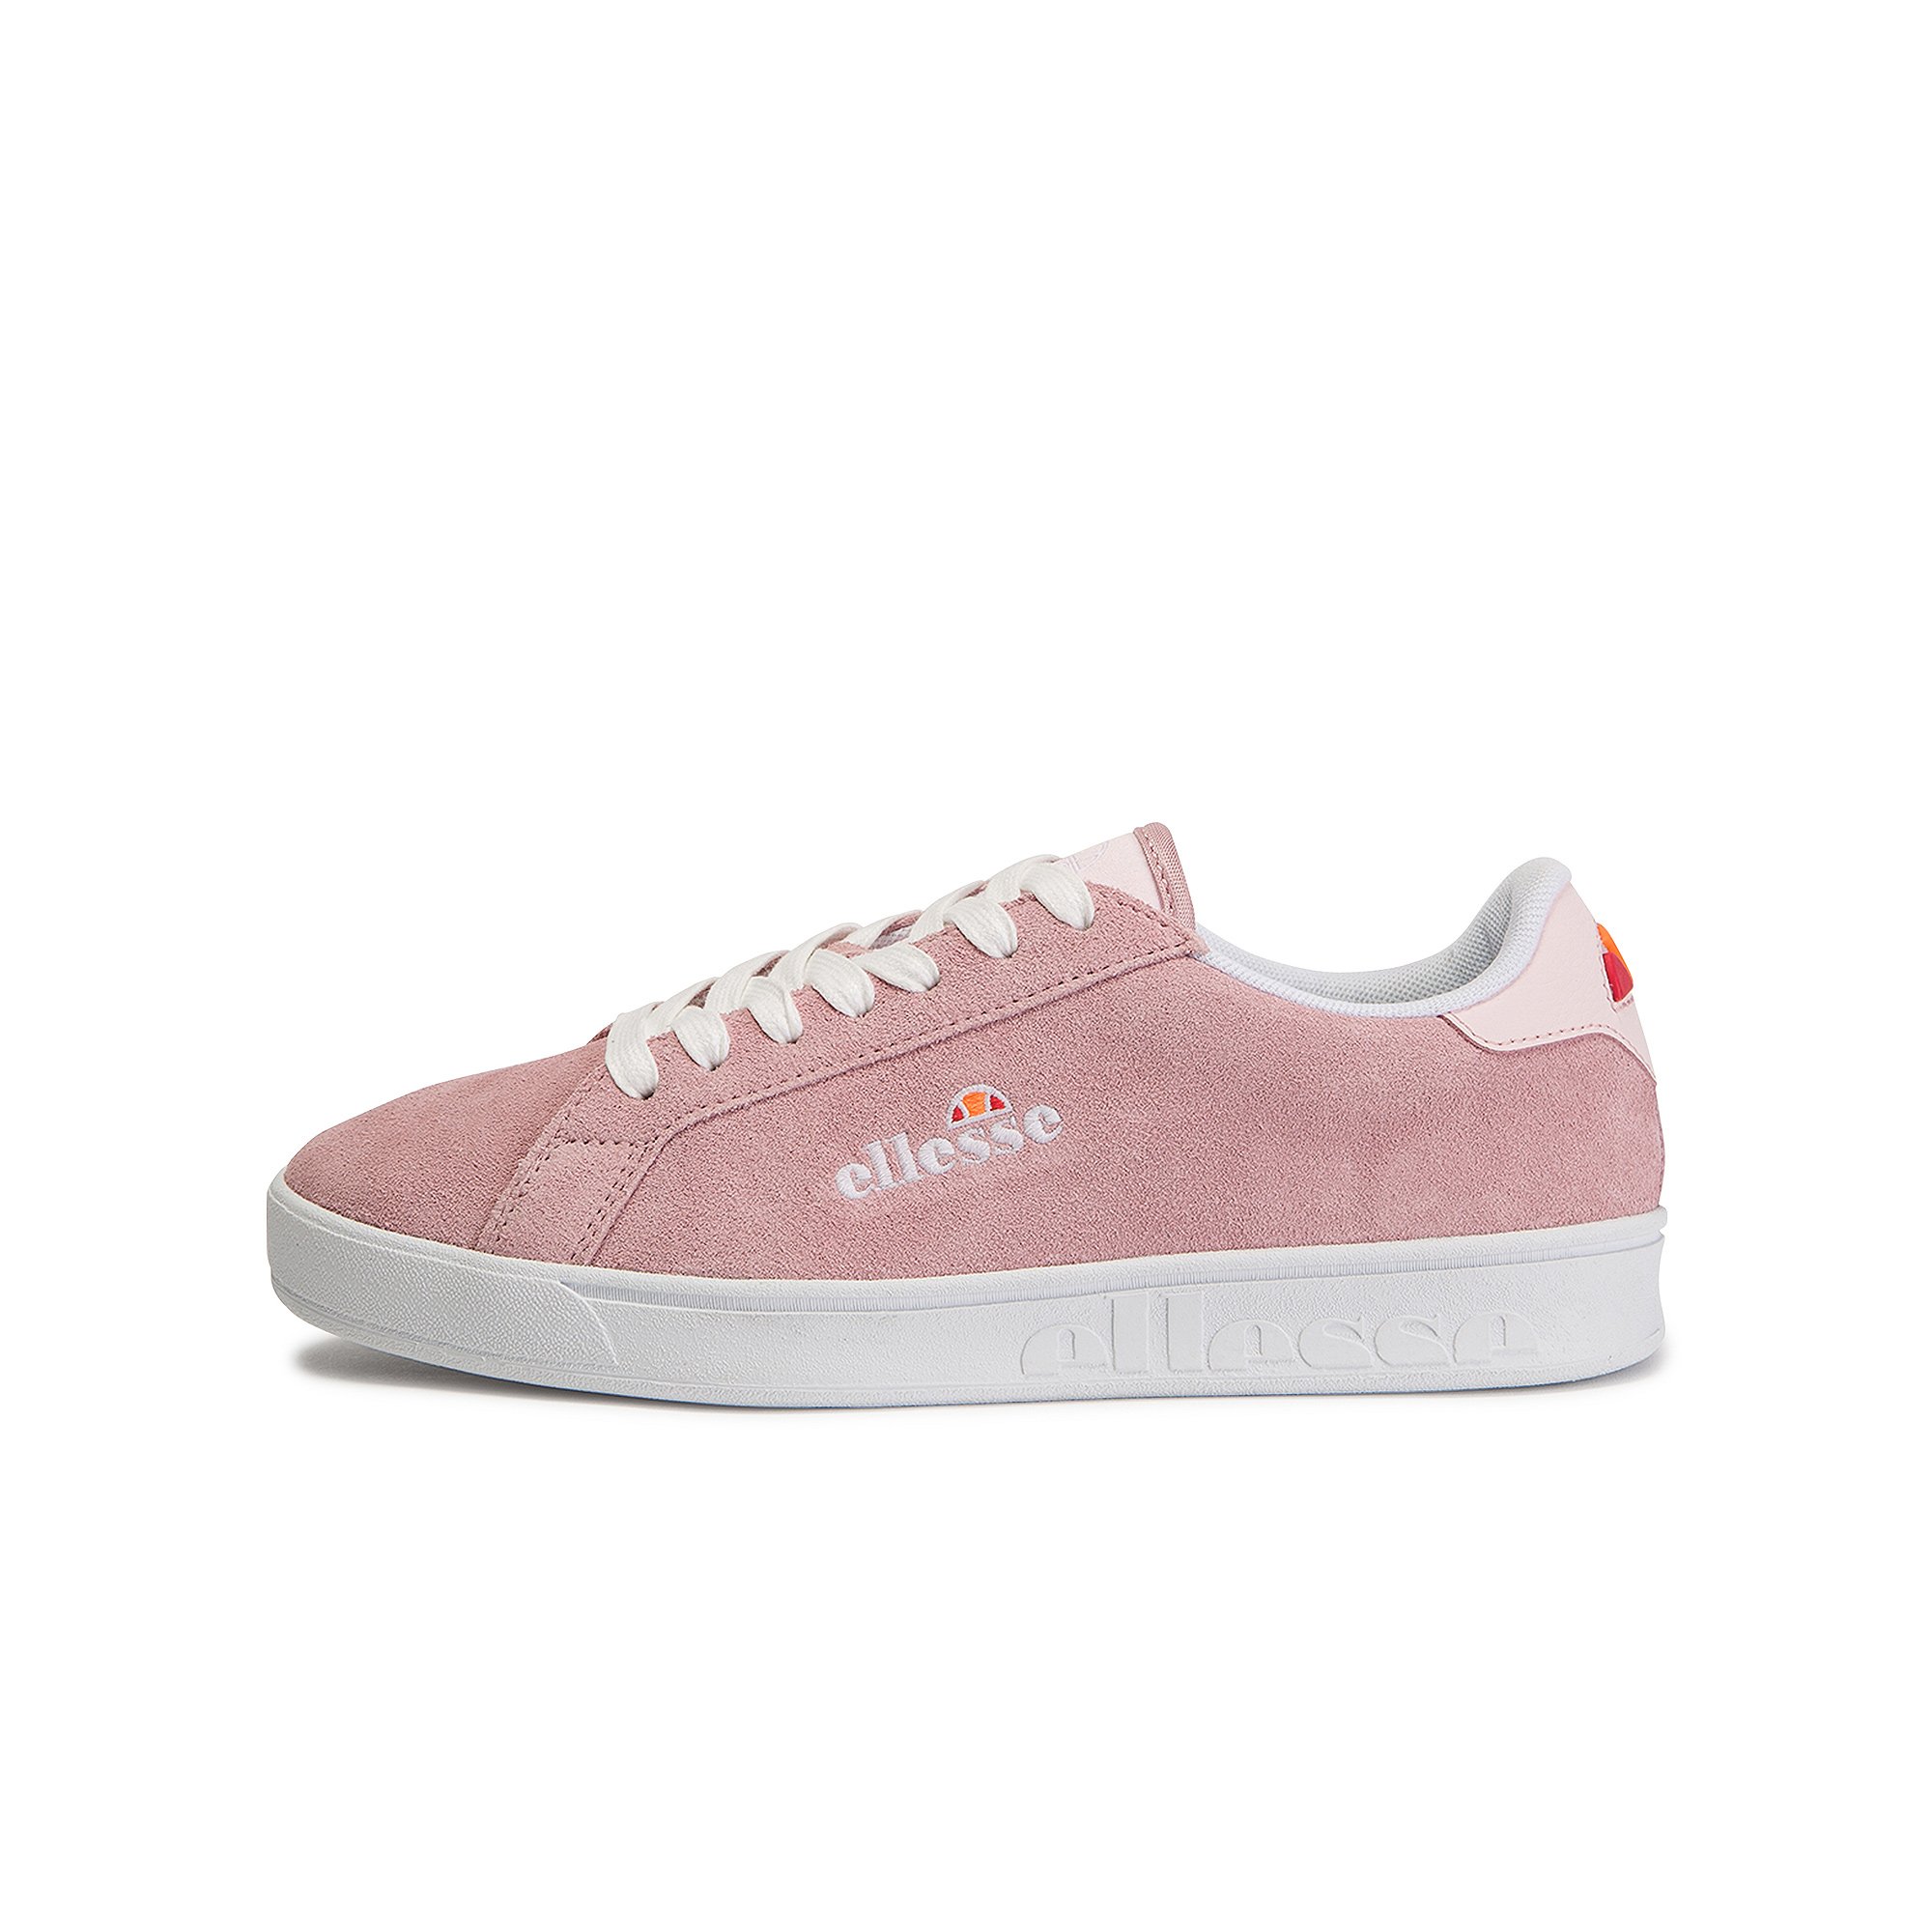 Giày thể thao nữ  ELLESSE Campo leather - 615913